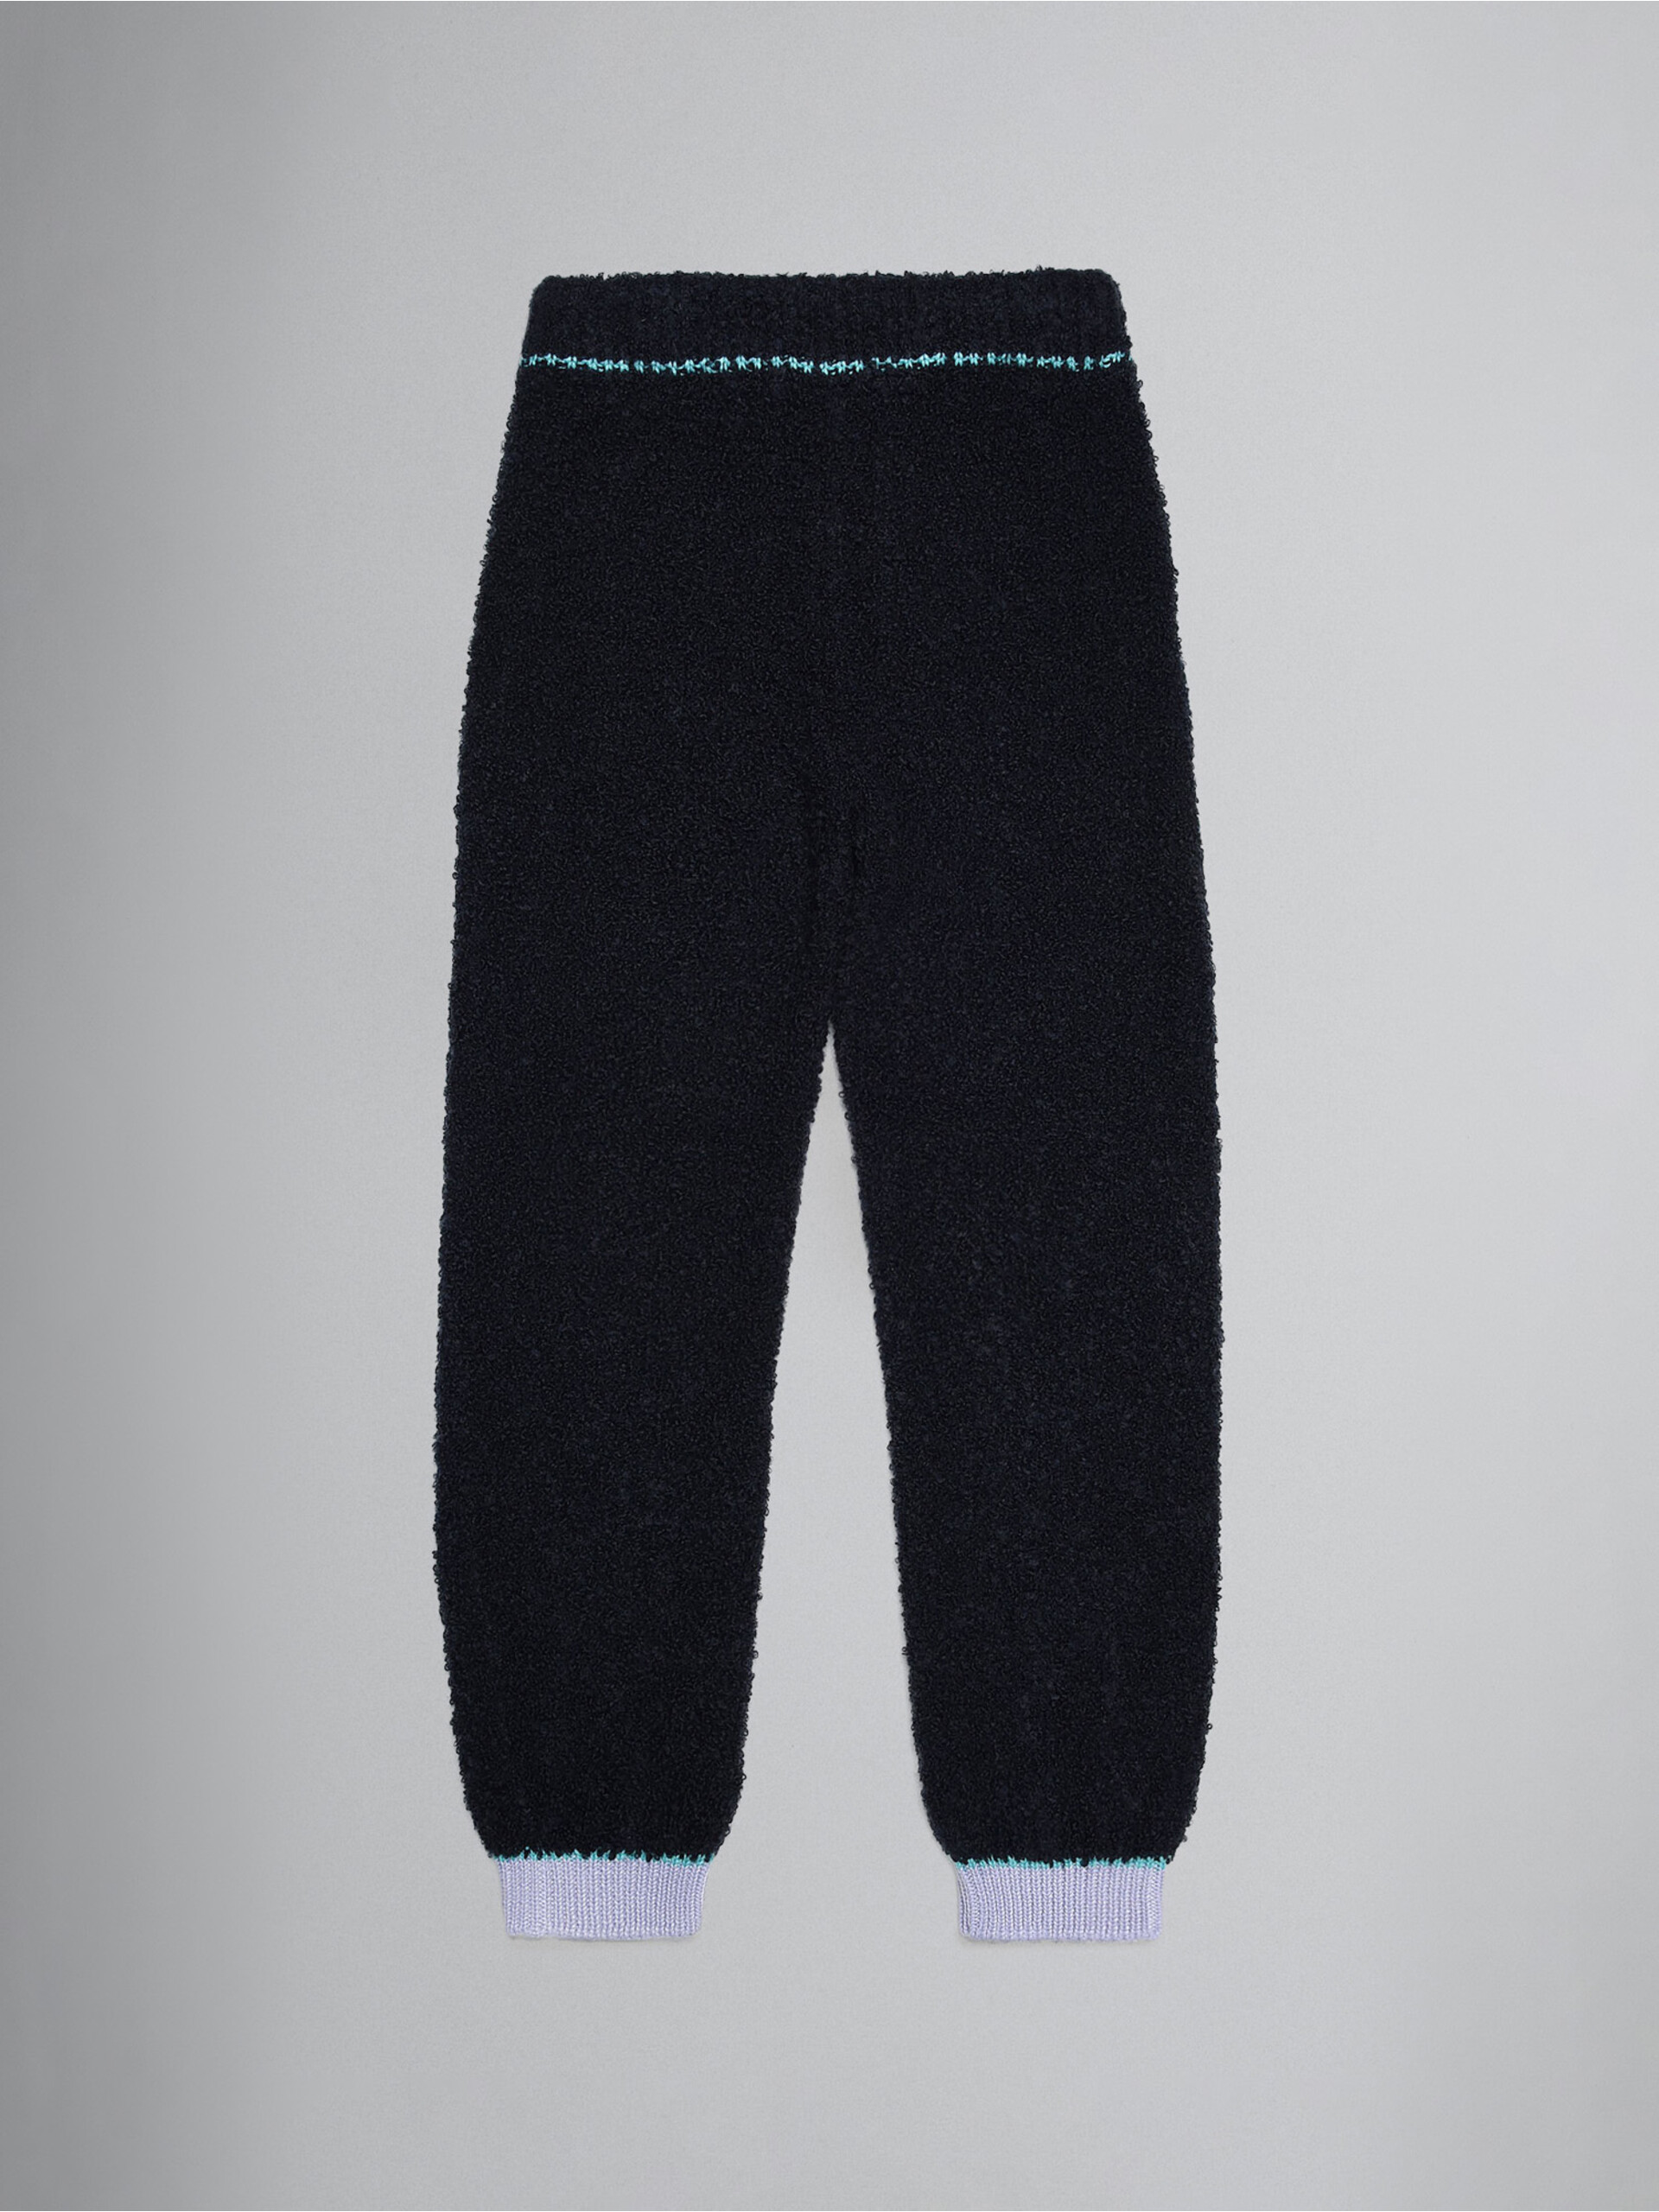 Navy blue teddy track pants with embroidery - Pants - Image 2